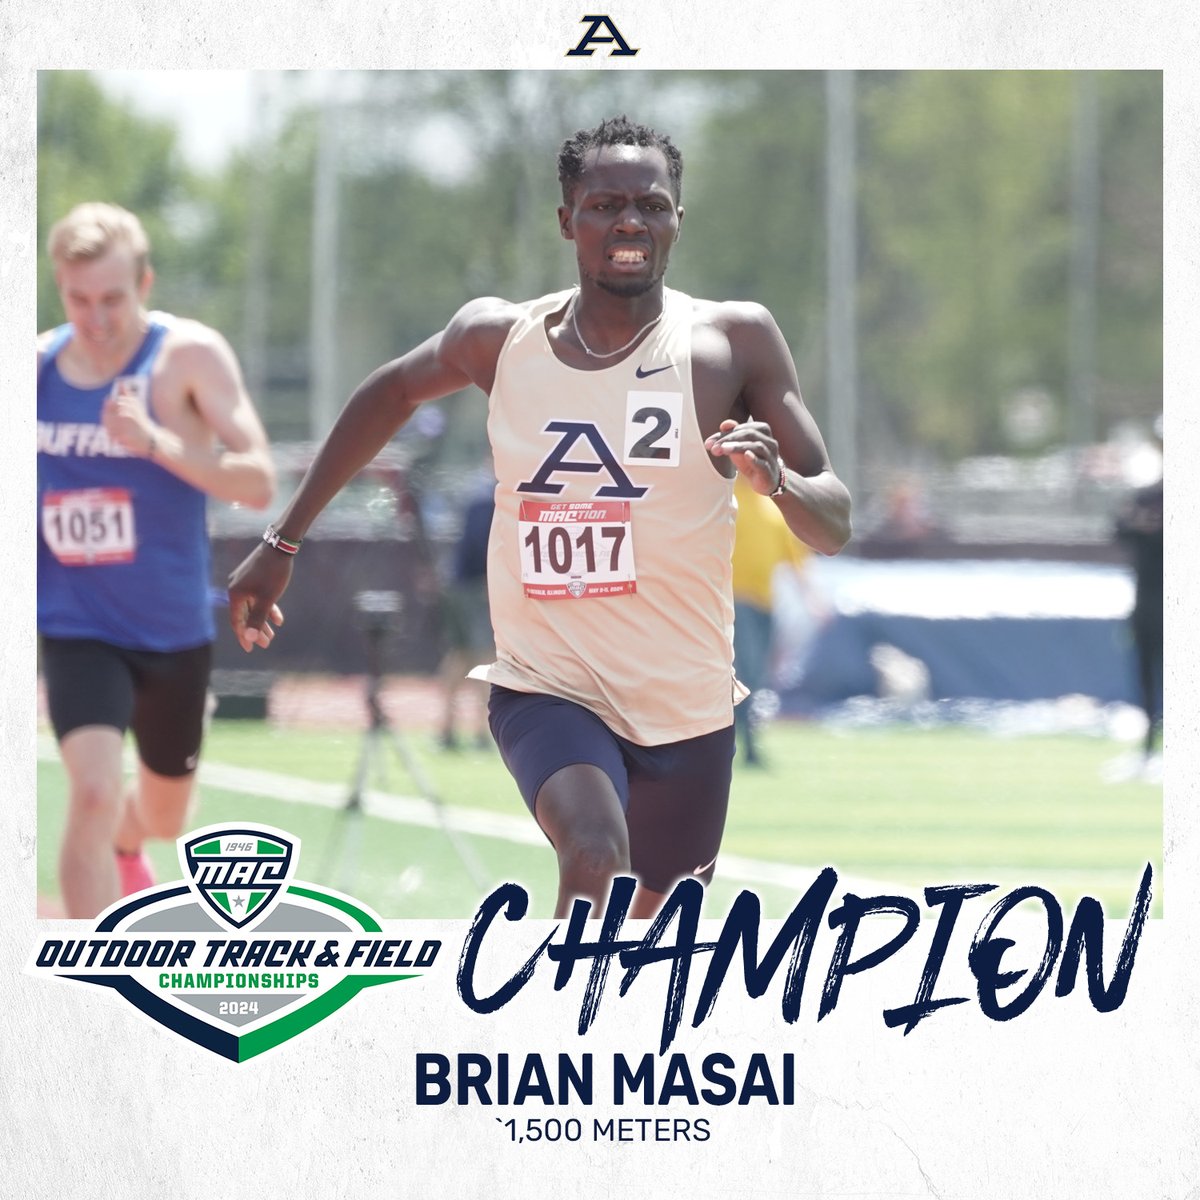 🚨 MAC CHAMPION 🚨 👏 @ZipsTFCC Brian Masai wins the @MACSports men's 1,500M crown to earn his fifth career league title with time of 3:45.16. #GoZips | @ZipsTFCC 🦘